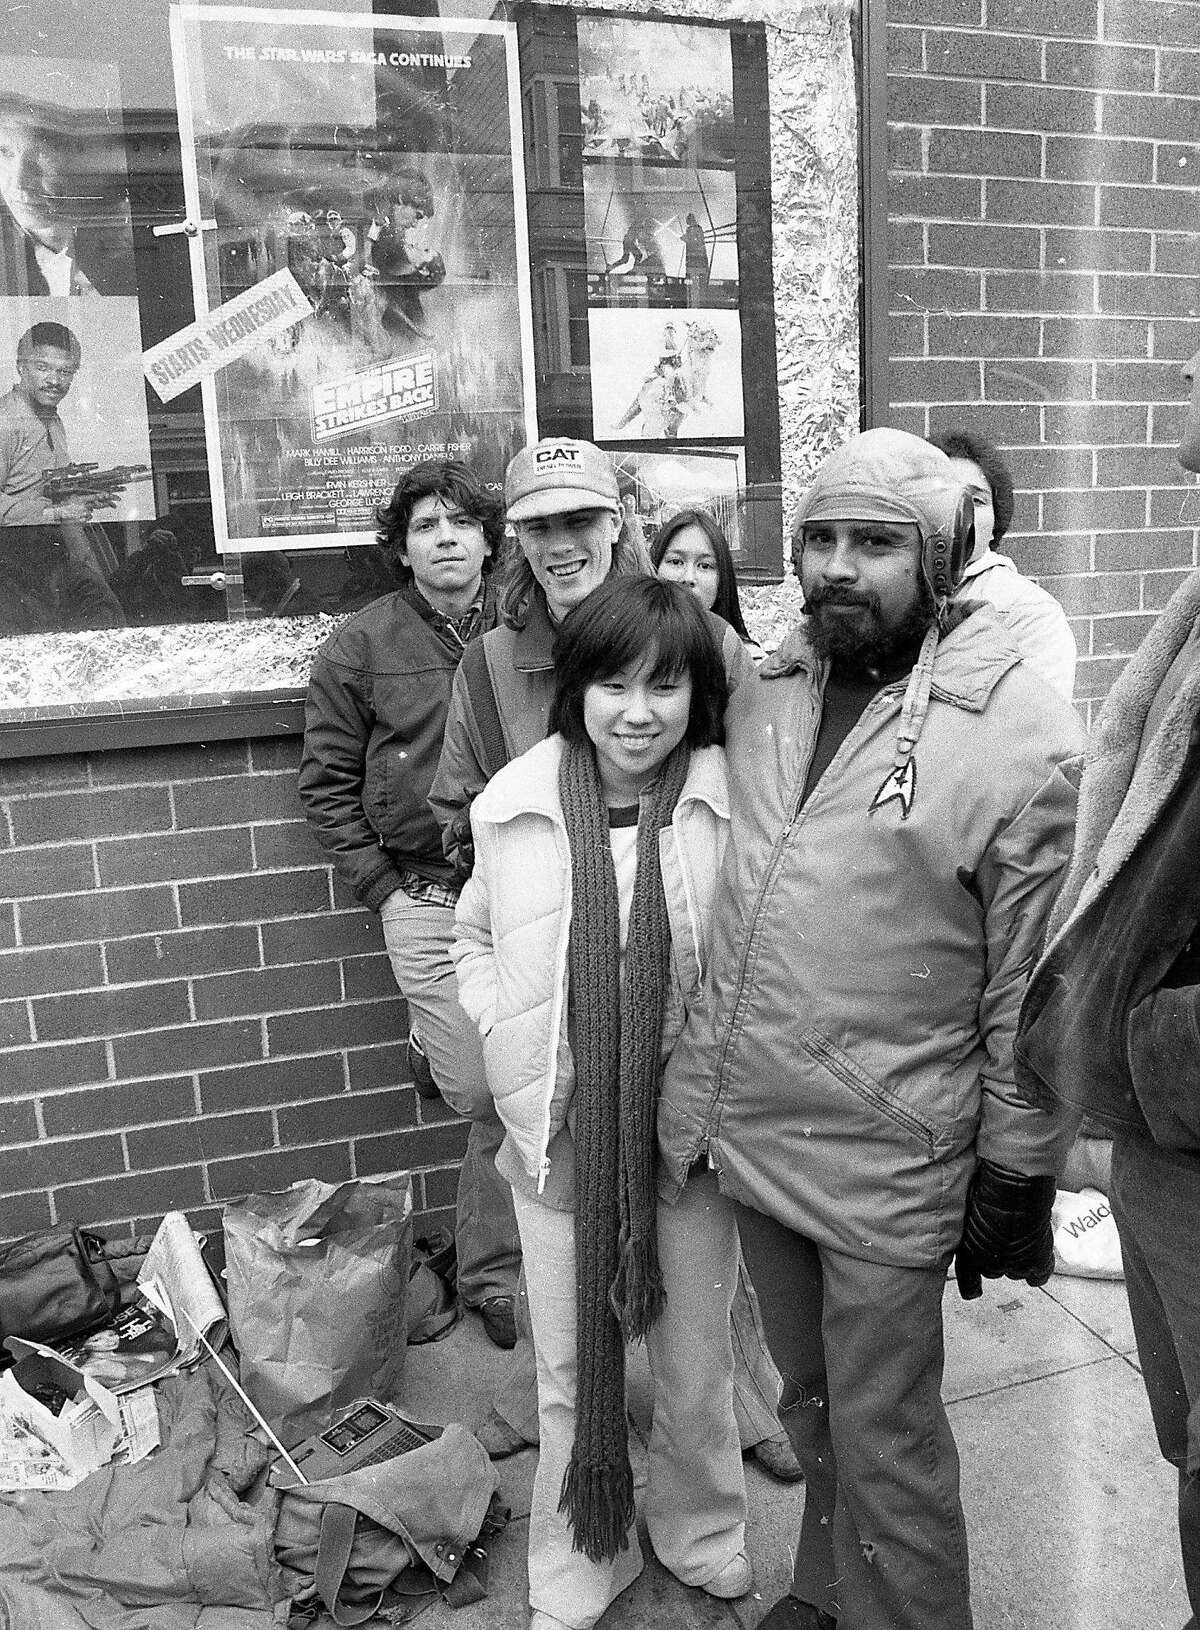 May 21, 1980: Fans wait in line for the first showing of "The Empire Strikes Back" at the Northpoint Theater in San Francisco.